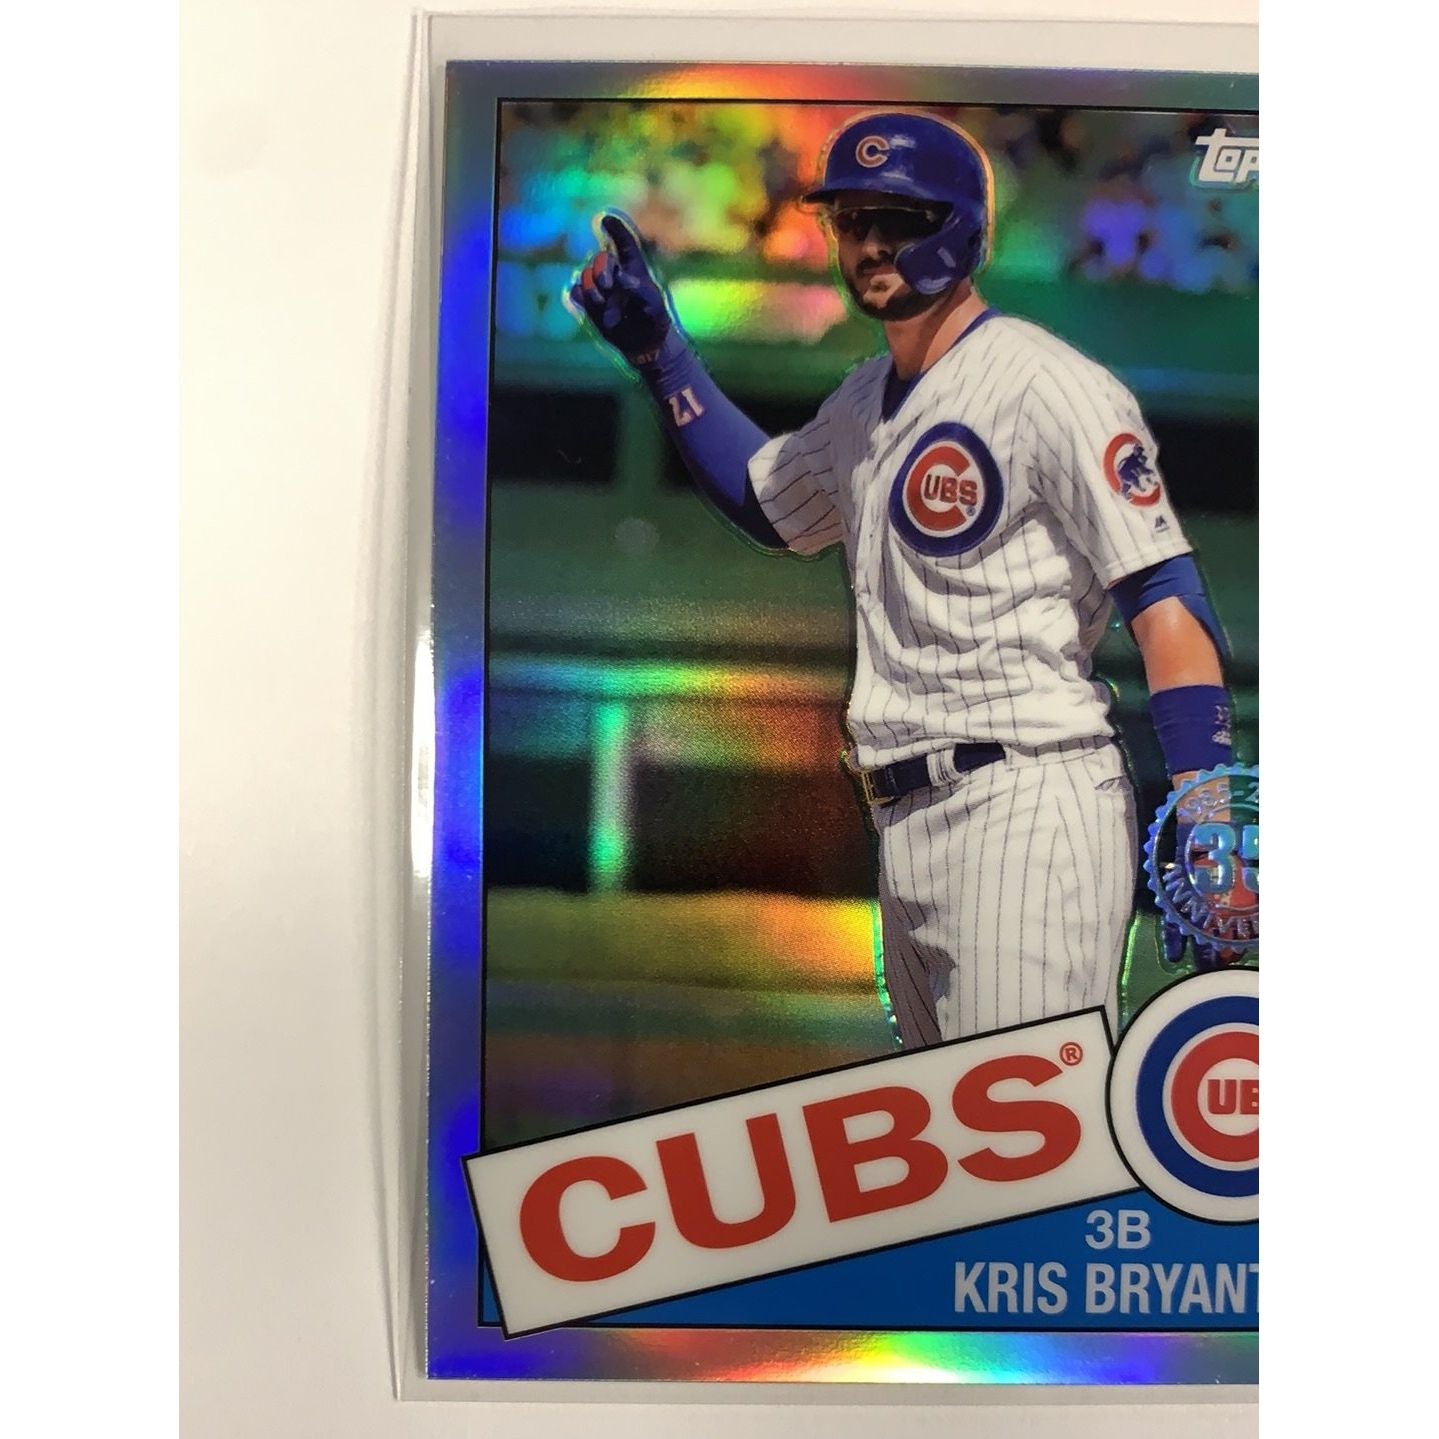  2020 Topps 35th Anniversary Kris Bryant Chrome Refractor  Local Legends Cards & Collectibles